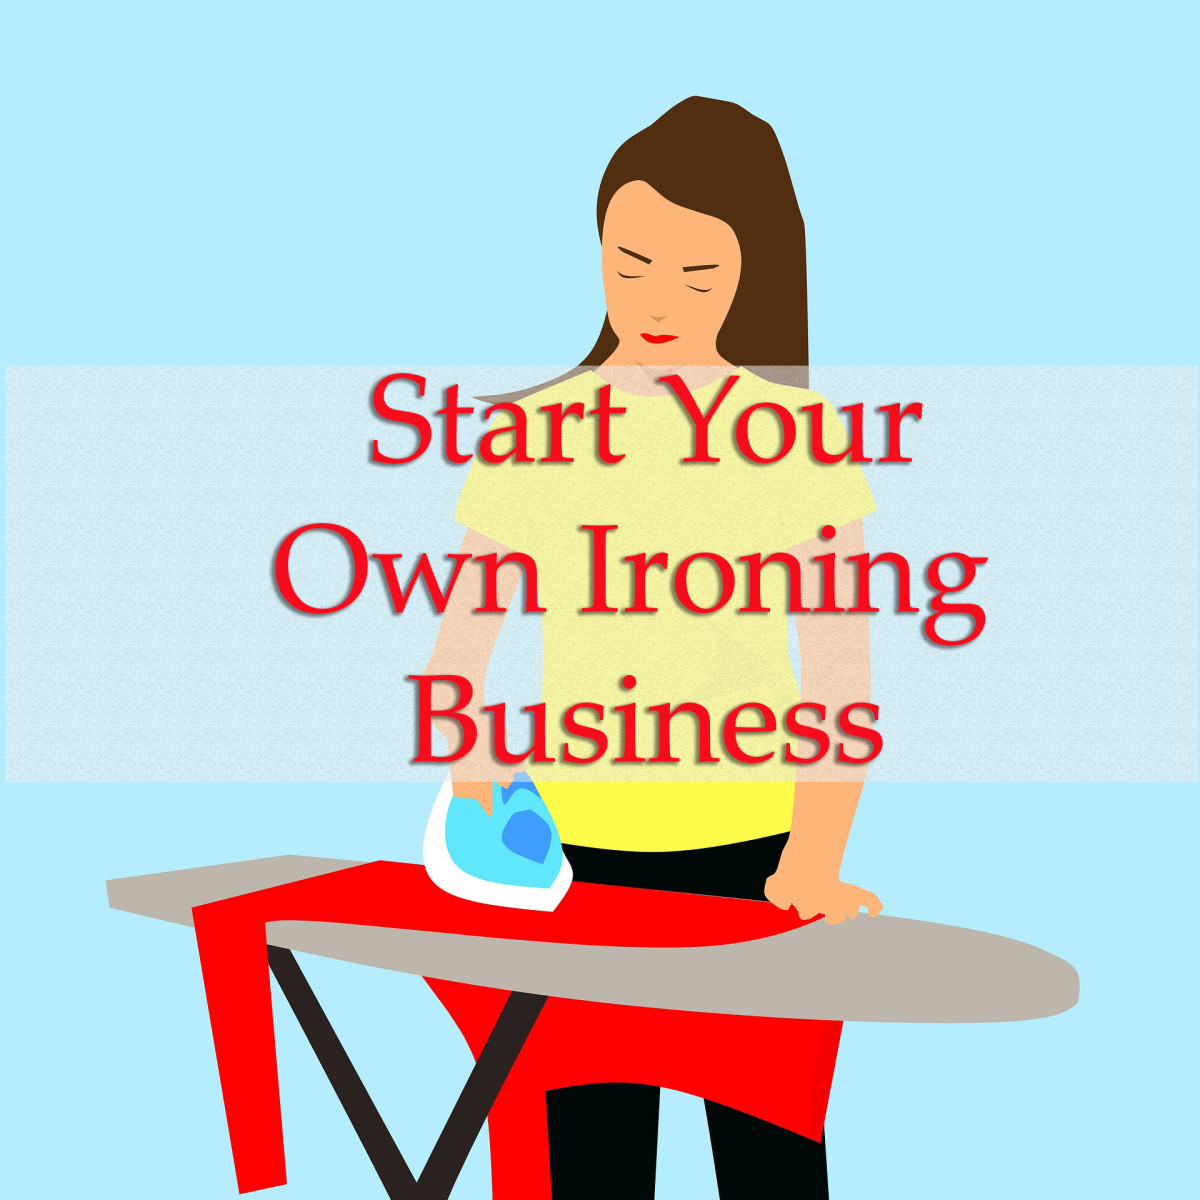 How to Start Your Own Ironing Business From Home